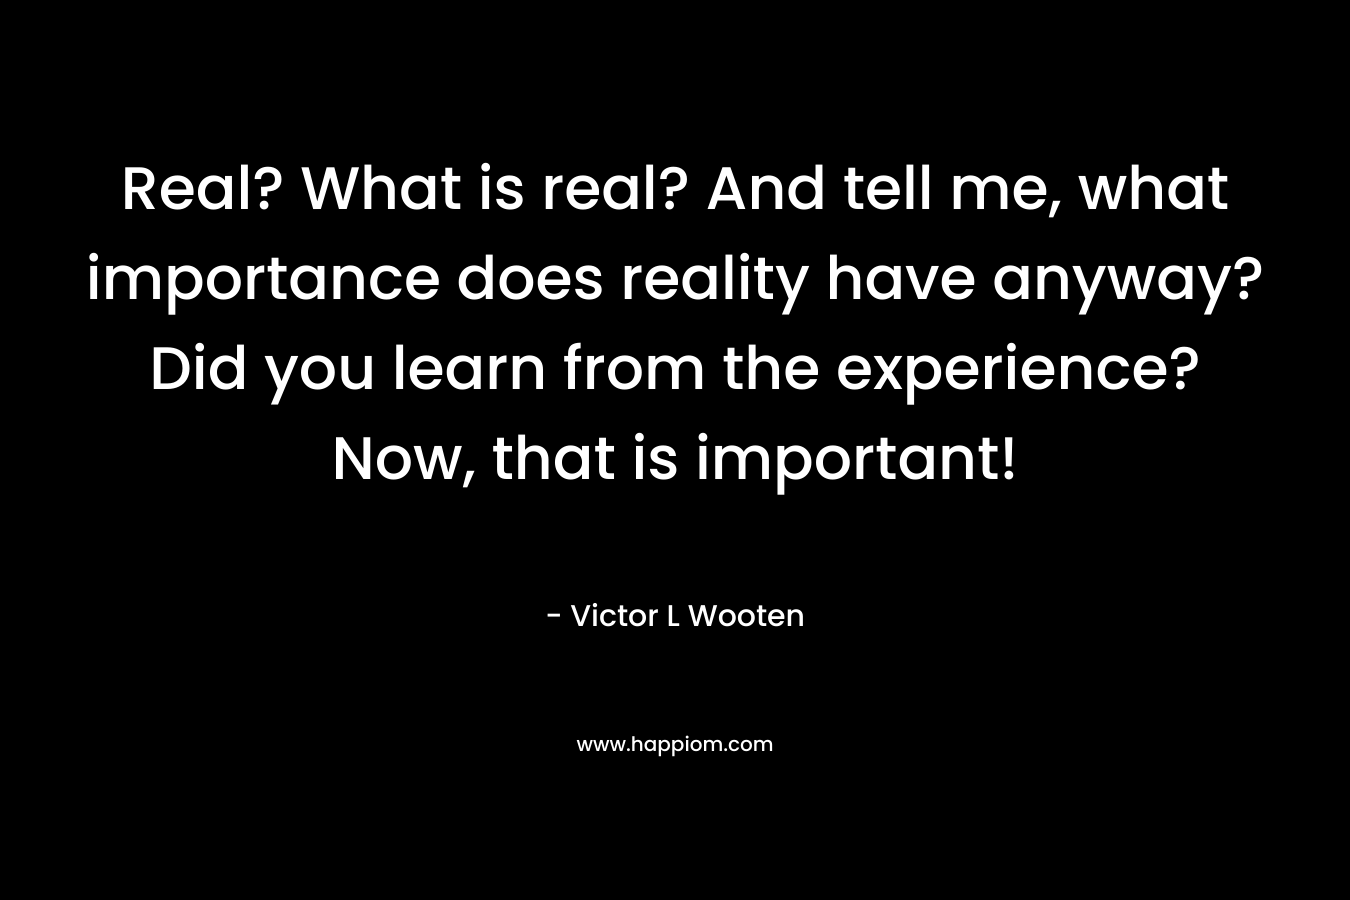 Real? What is real? And tell me, what importance does reality have anyway? Did you learn from the experience? Now, that is important!